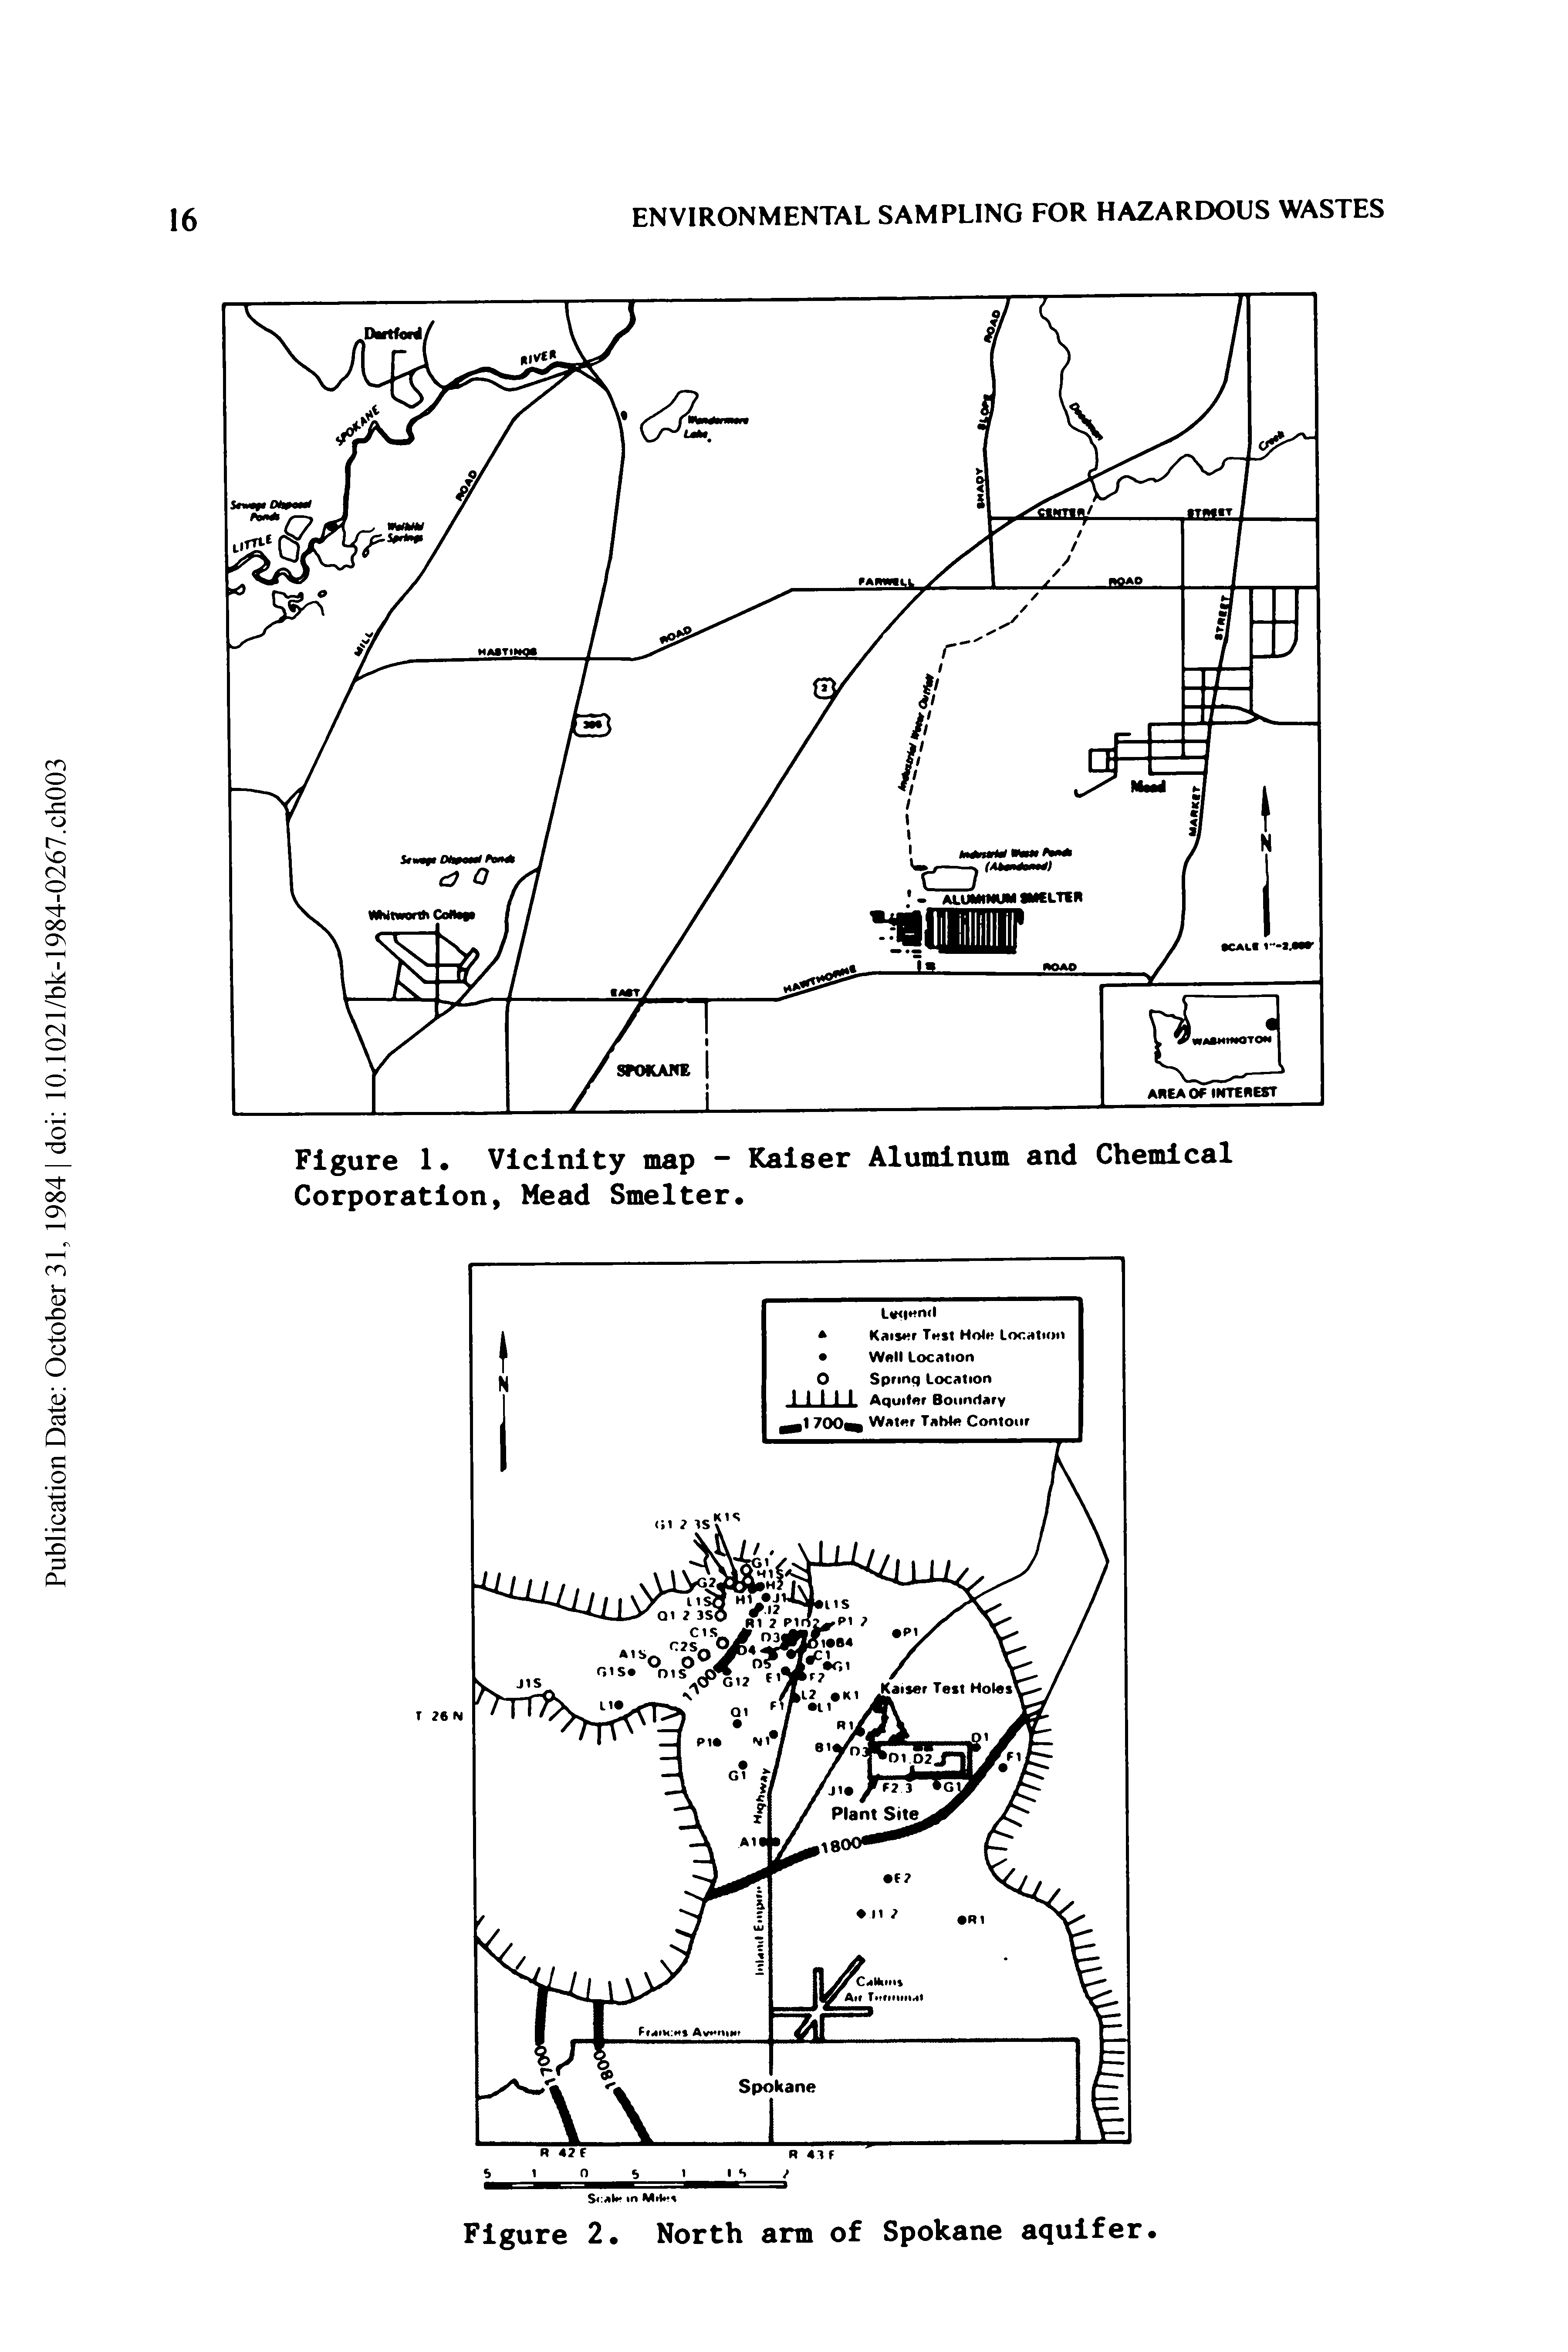 Figure 1. Vicinity map - Kaiser Aluminum and Chemical Corporation, Mead Smelter.